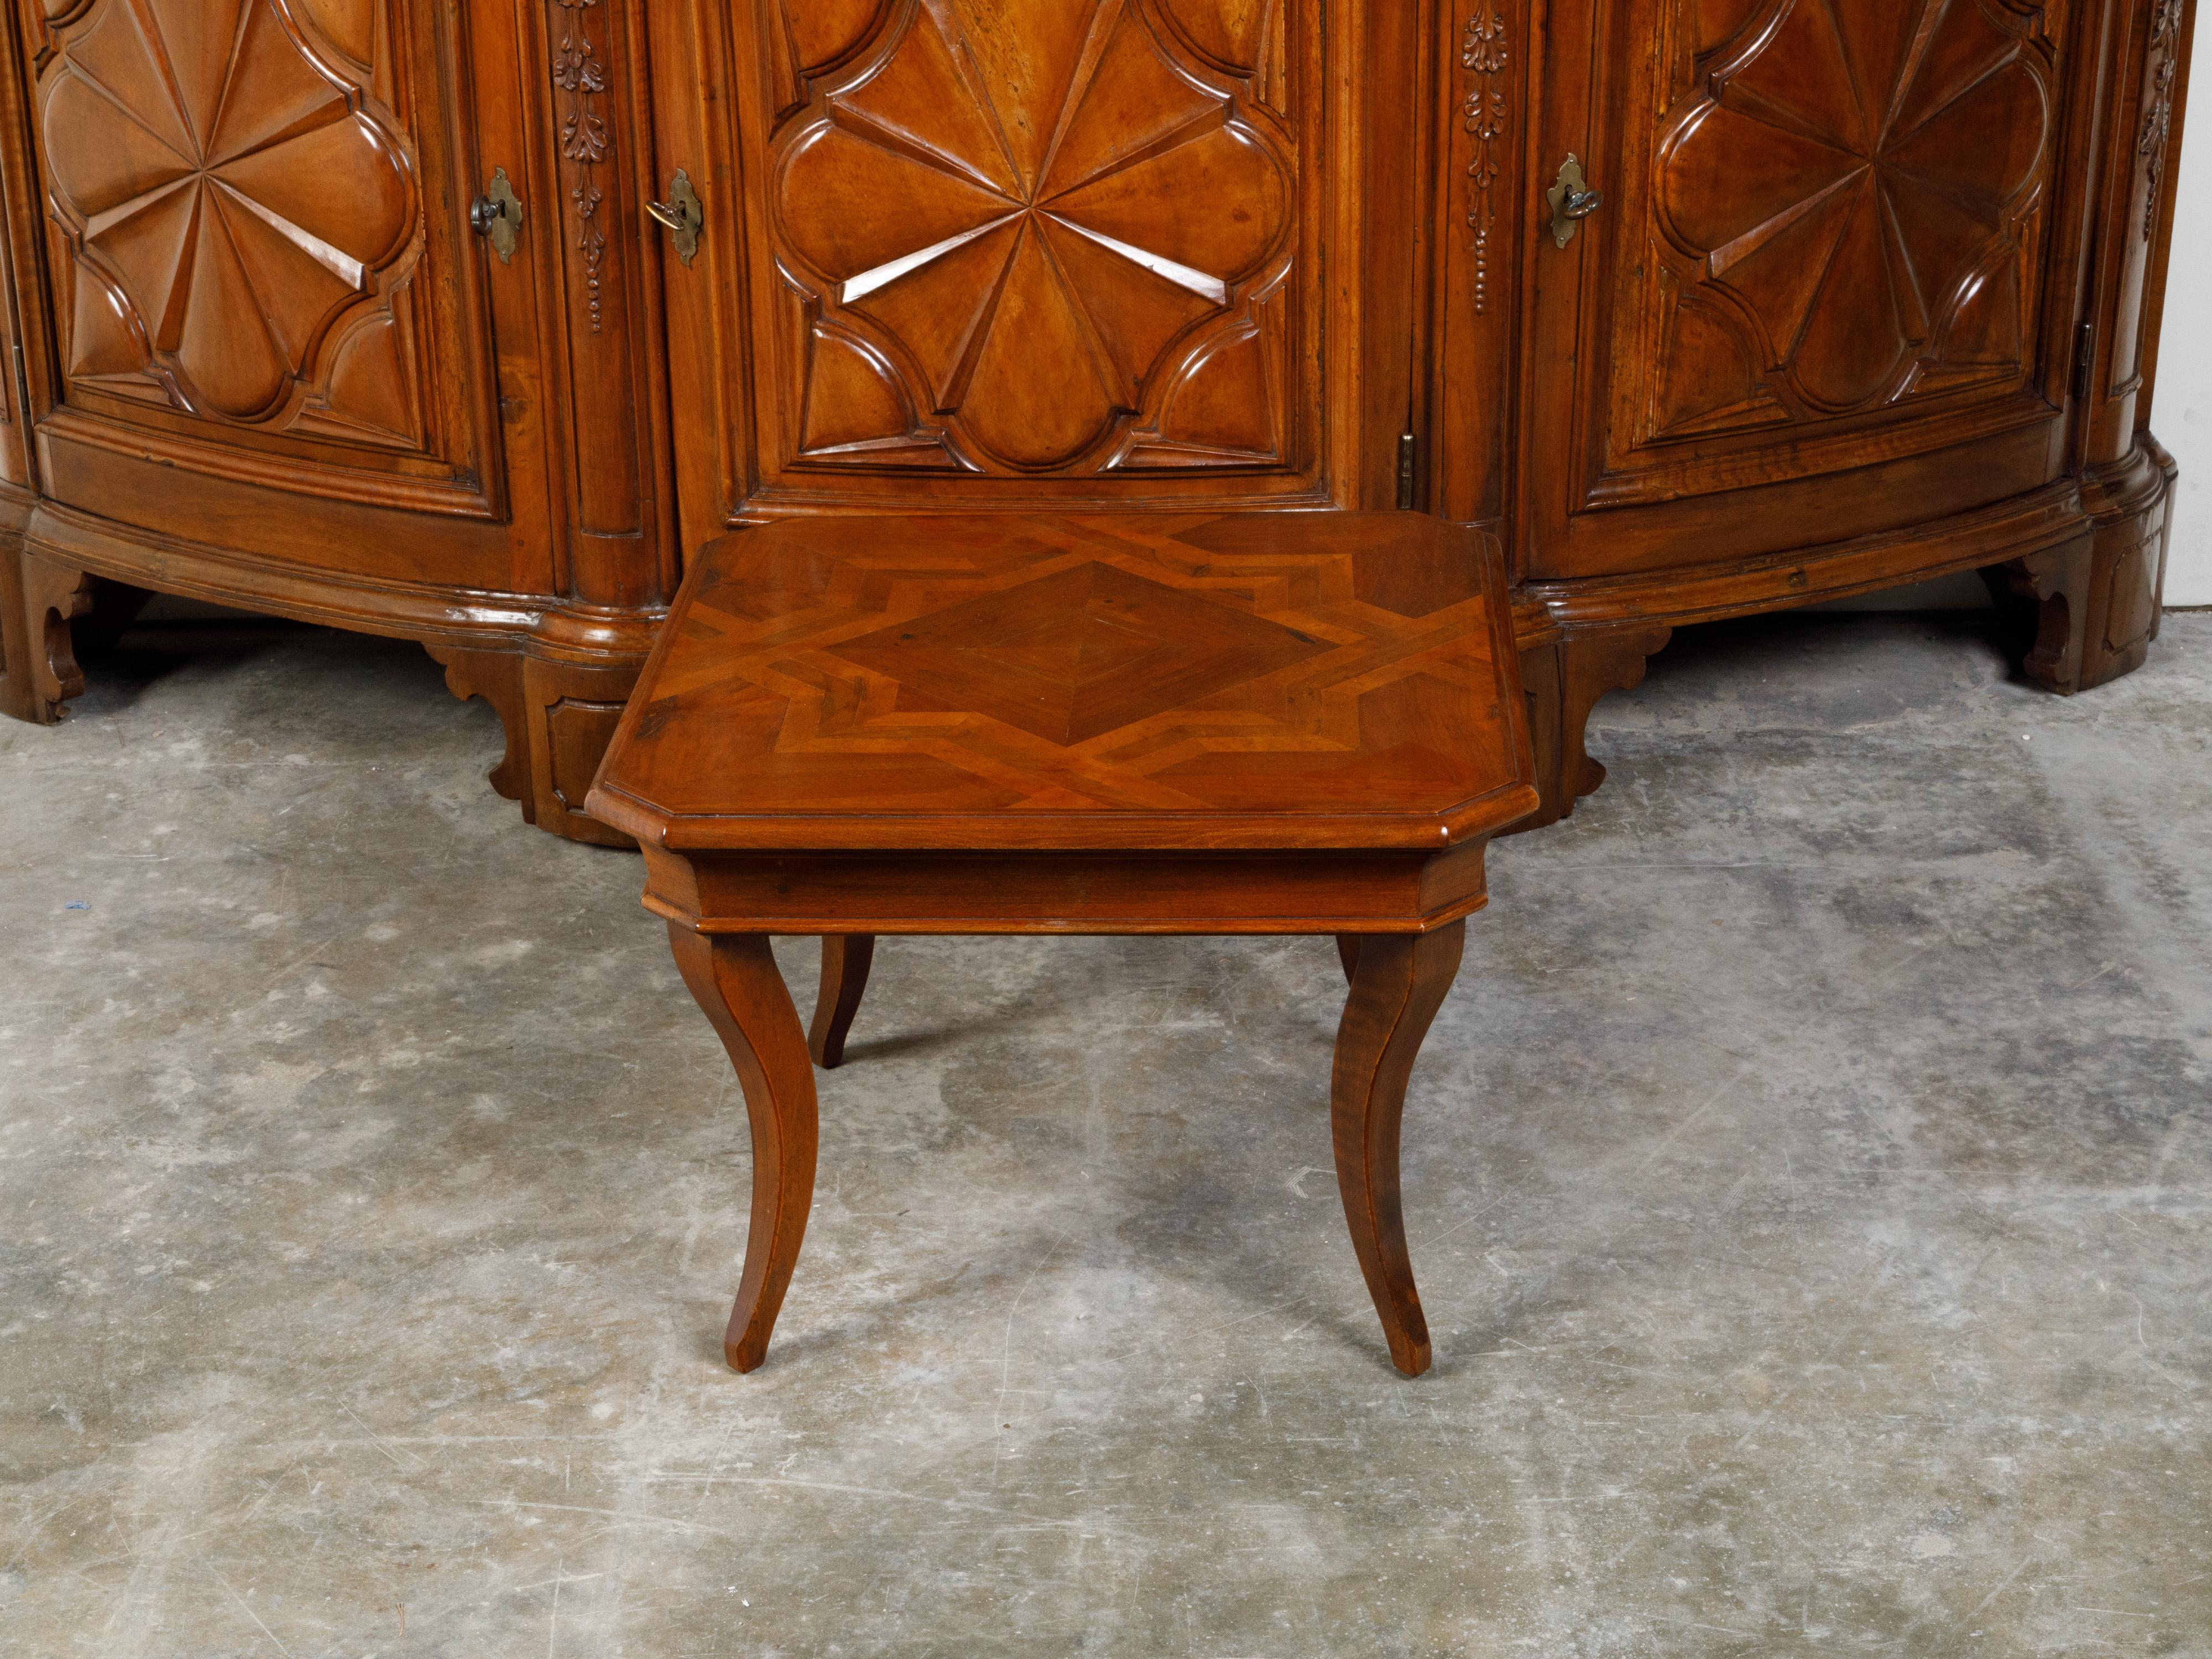 A walnut coffee table from the mid 20th century, with geometric star-inlaid top and curving legs. Created during the Midcentury period, this coffee table captures our attention with its square top with star inlay and canted corners, sitting above